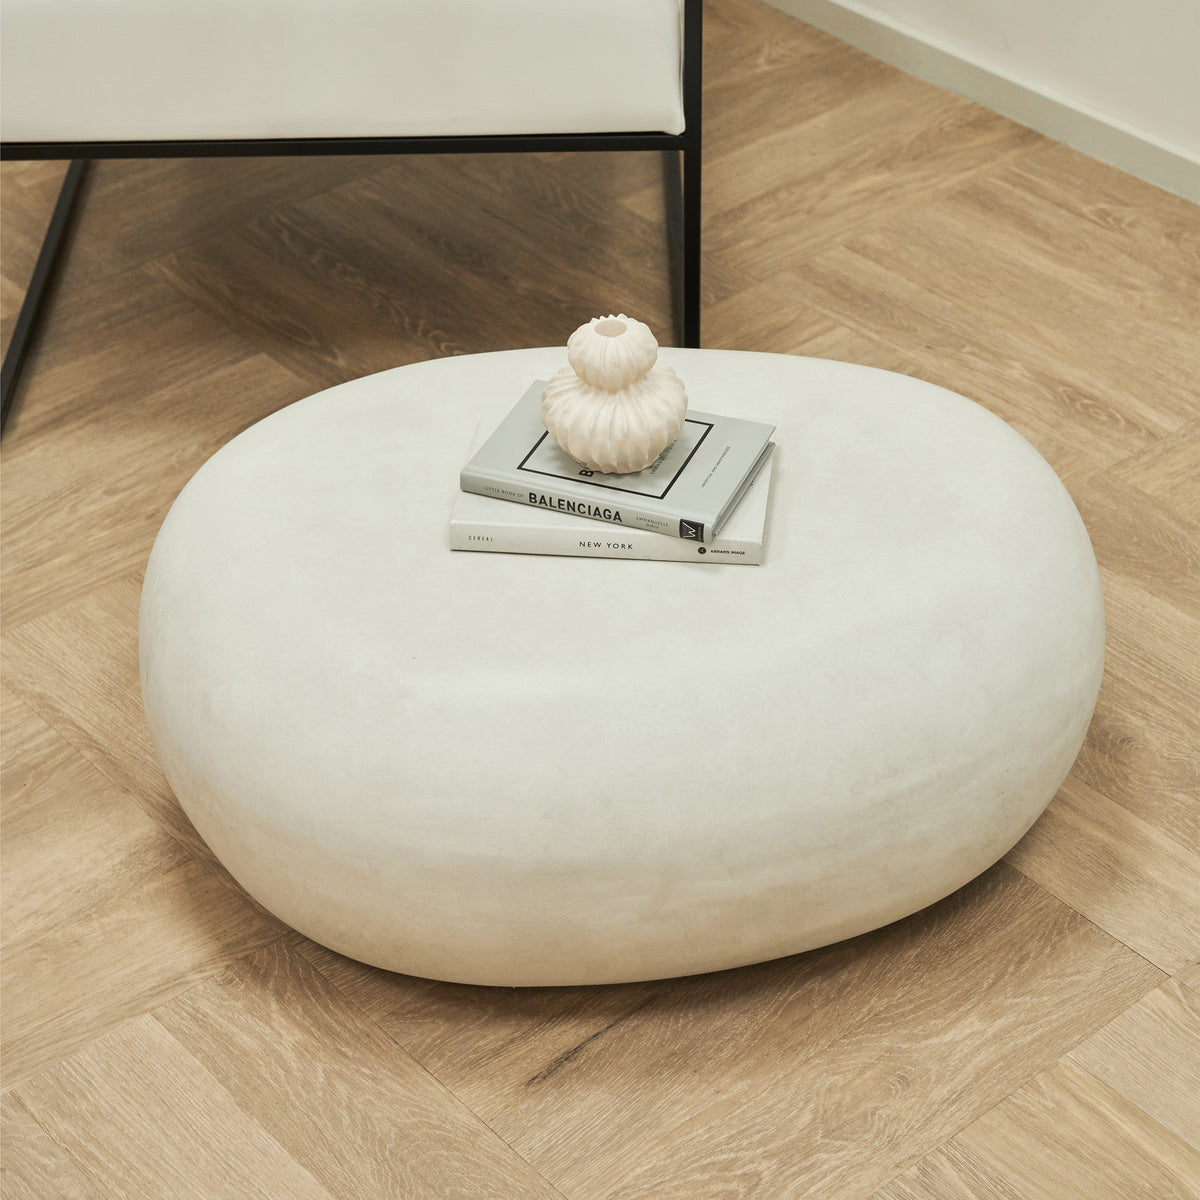 Minimal Concrete Pebble Coffee Table Large adorned with books